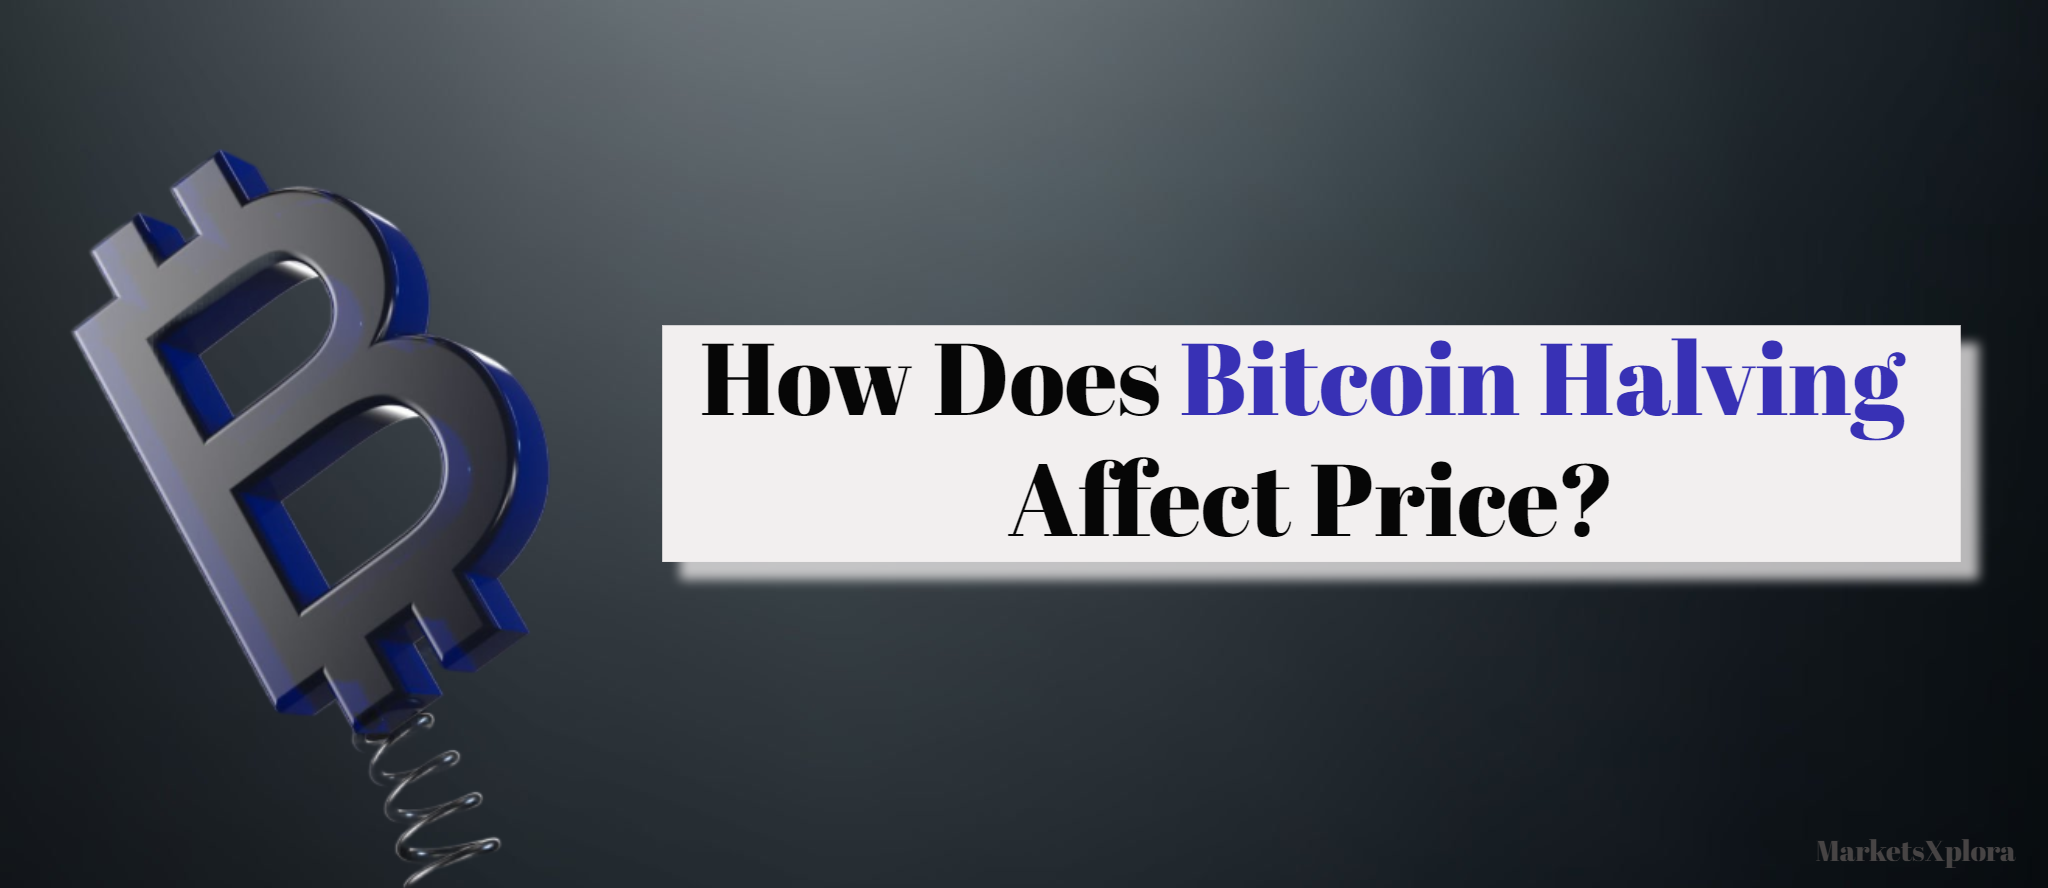 How Does Bitcoin Halving Affect Price? Learn the intricate connections between Bitcoin's halving events, supply dynamics, and market forces that shape its price trajectory.